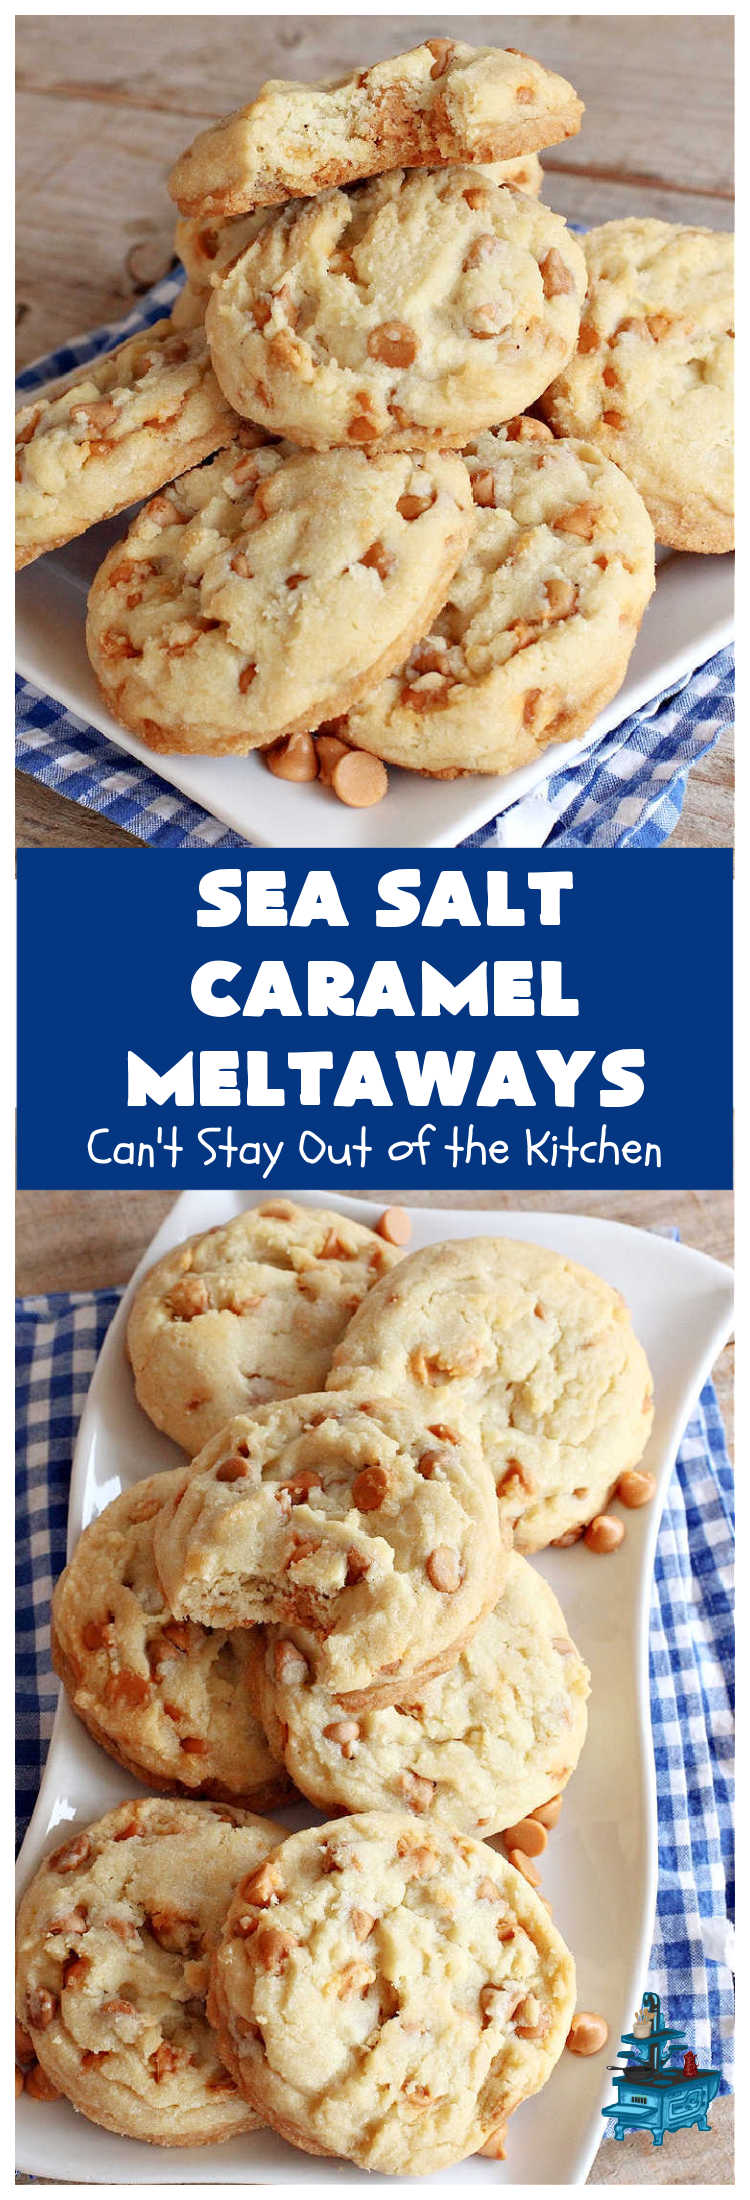 Sea Salt Caramel Meltaways | Can't Stay Out of the Kitchen | these melt-in-your-mouth #cookies are rich, decadent & divine! Every mouthful is irresistible & will make you swoon! If you enjoy #SeaSaltCaramelChips this #dessert is for you. Perfect for #tailgating or office parties, potlucks, backyard BBQs & any family get-together. #meltaways #SeaSaltCaramelMeltaways #caramel #CaramelDessert